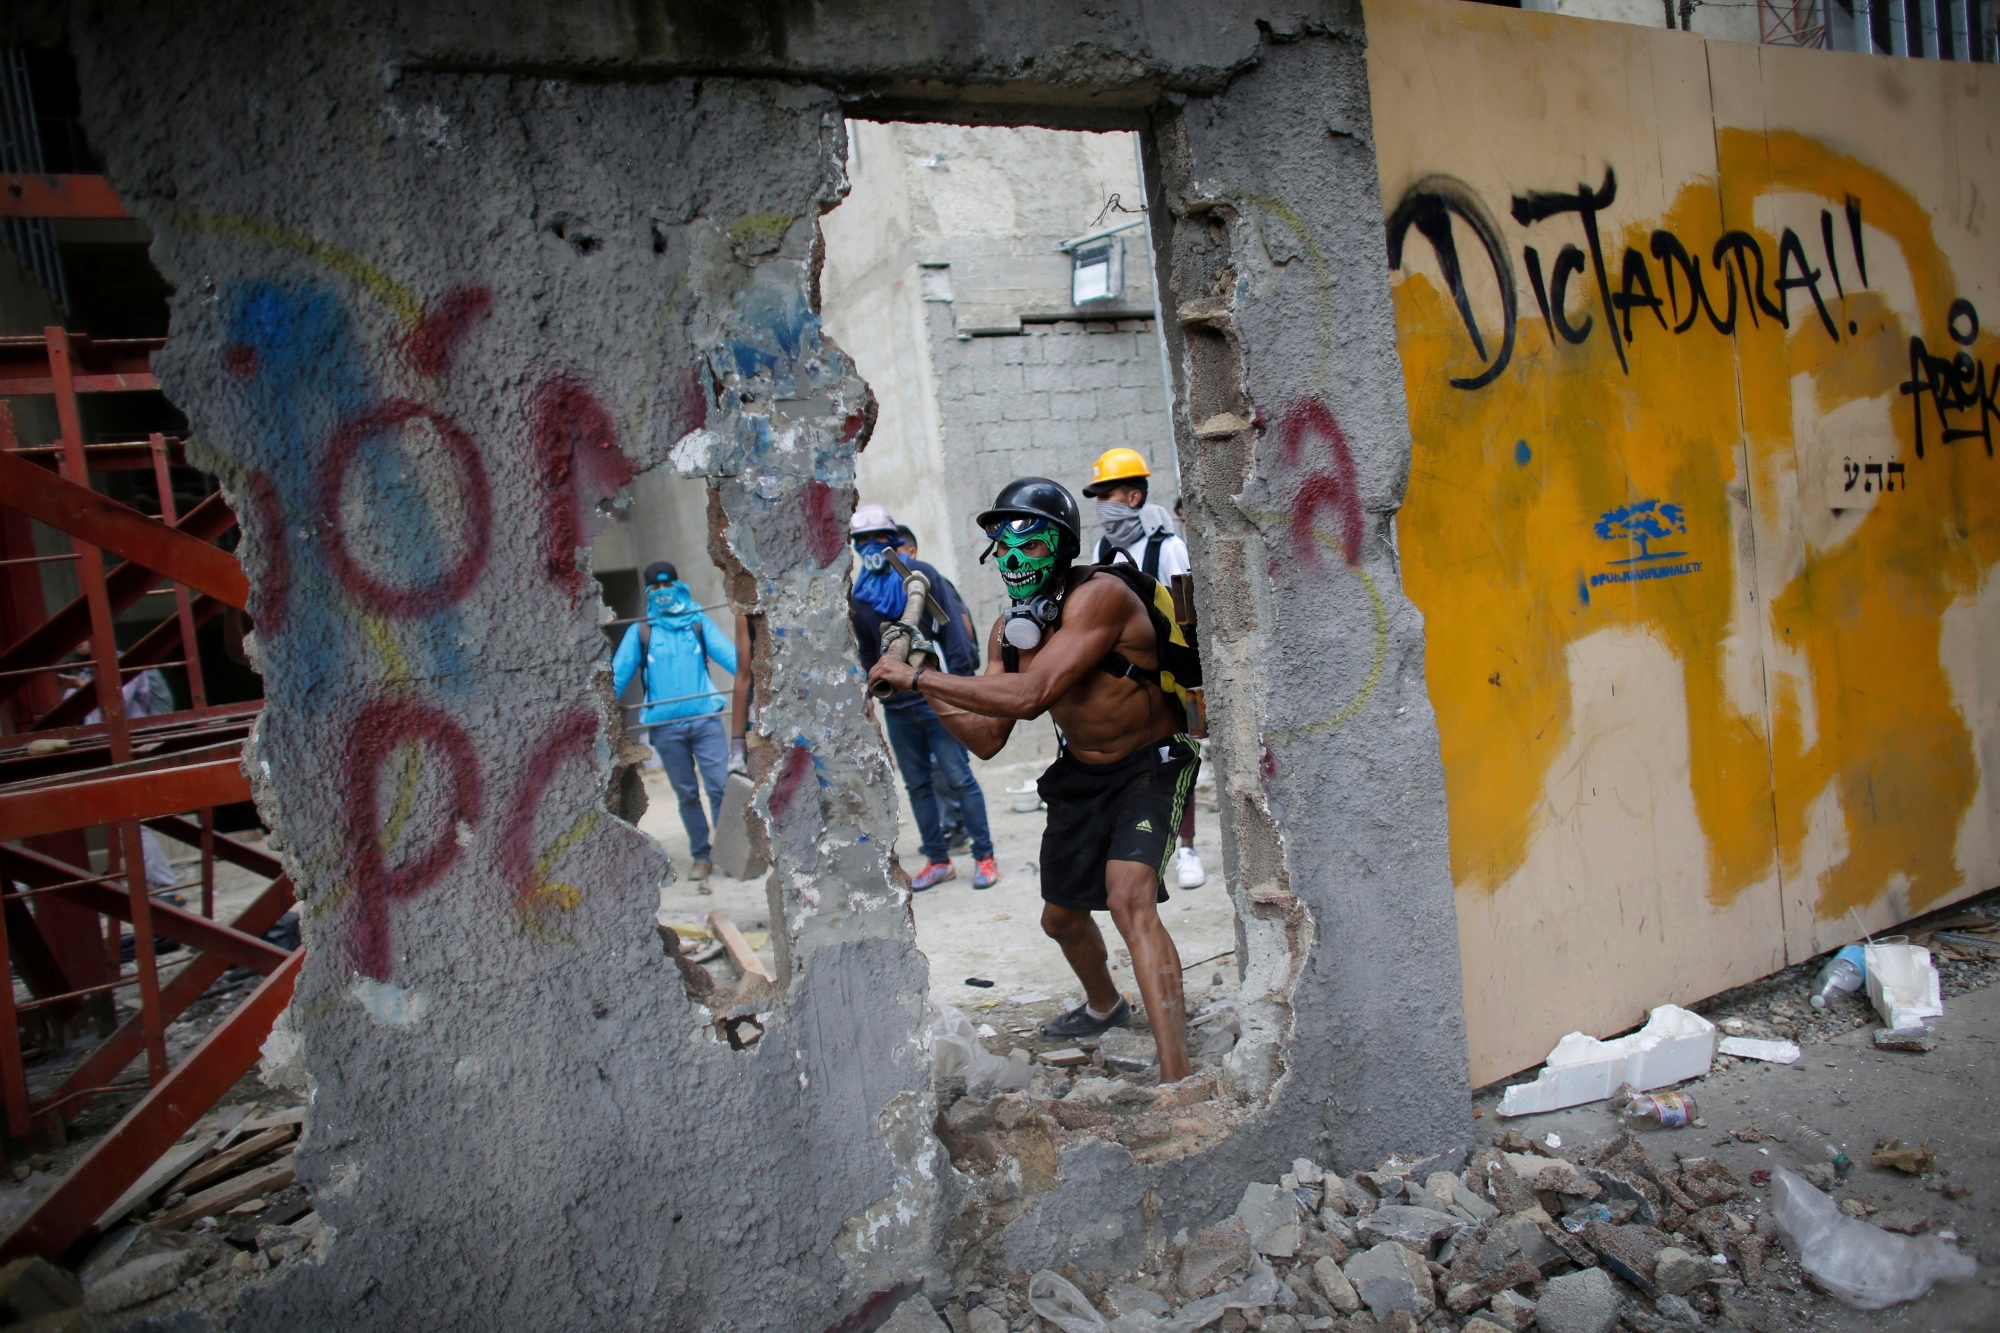 An anti-government demonstrator whacks a a wall to release pieces of concrete to throw at Venezuelan Bolivarian National Police, during a protest against the installation of a constitutional assembly in Caracas, Venezuela, Friday, Aug. 4, 2017. Defying criticism from Washington to the Vatican, Venezuela's ruling party on Friday installed a new super assembly that supporters promise will pacify the country and critics fear will be a tool for imposing dictatorship. (AP Photo/Ariana Cubillos) APTOPIX Venezuela Political Crisis